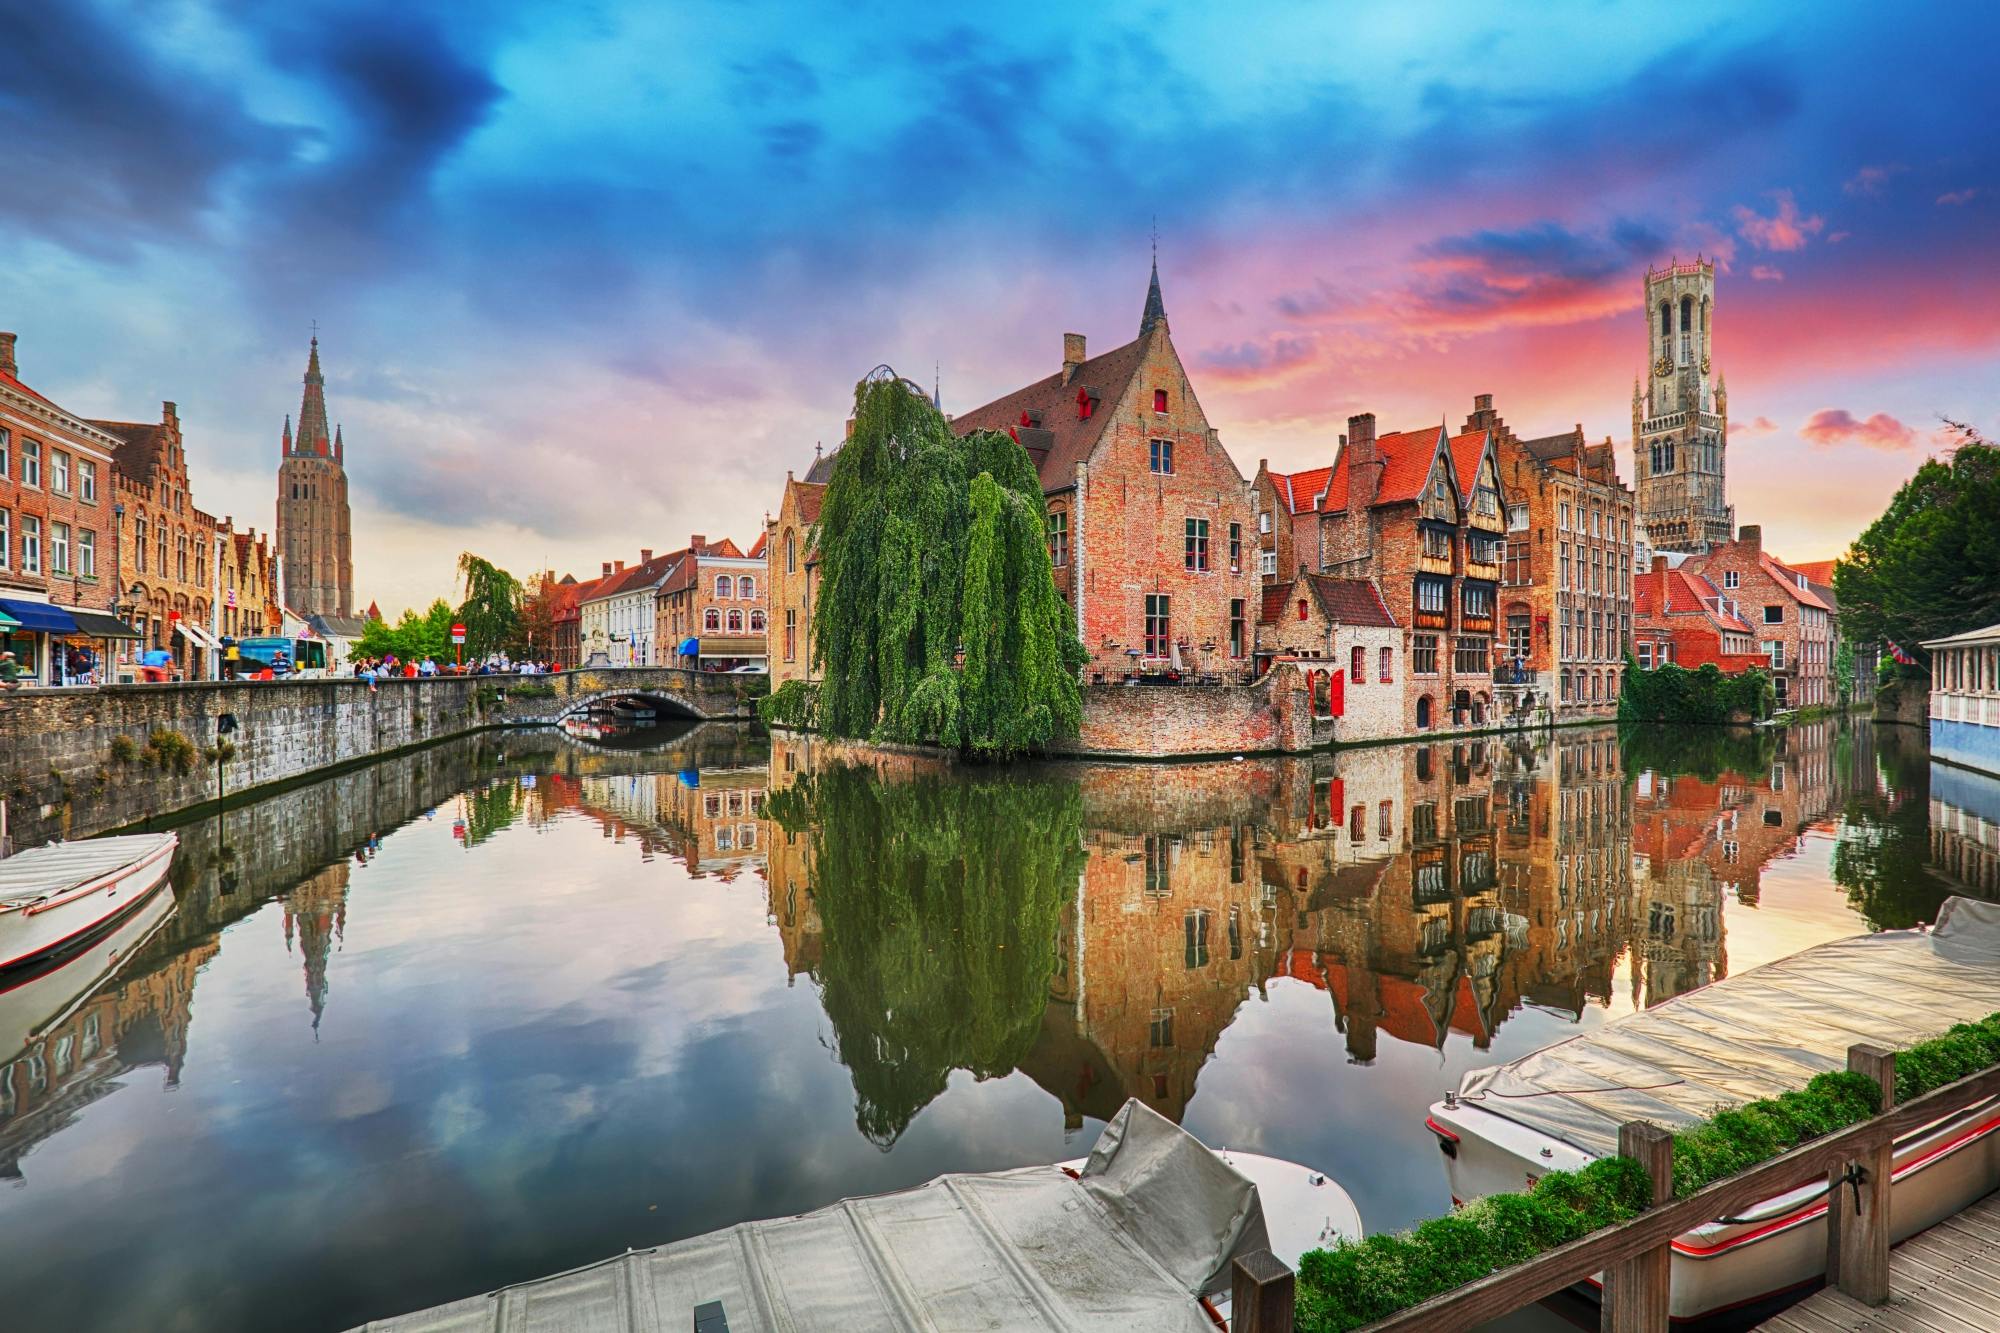 Tour the highlights of Bruges in a city exploration game app Musement